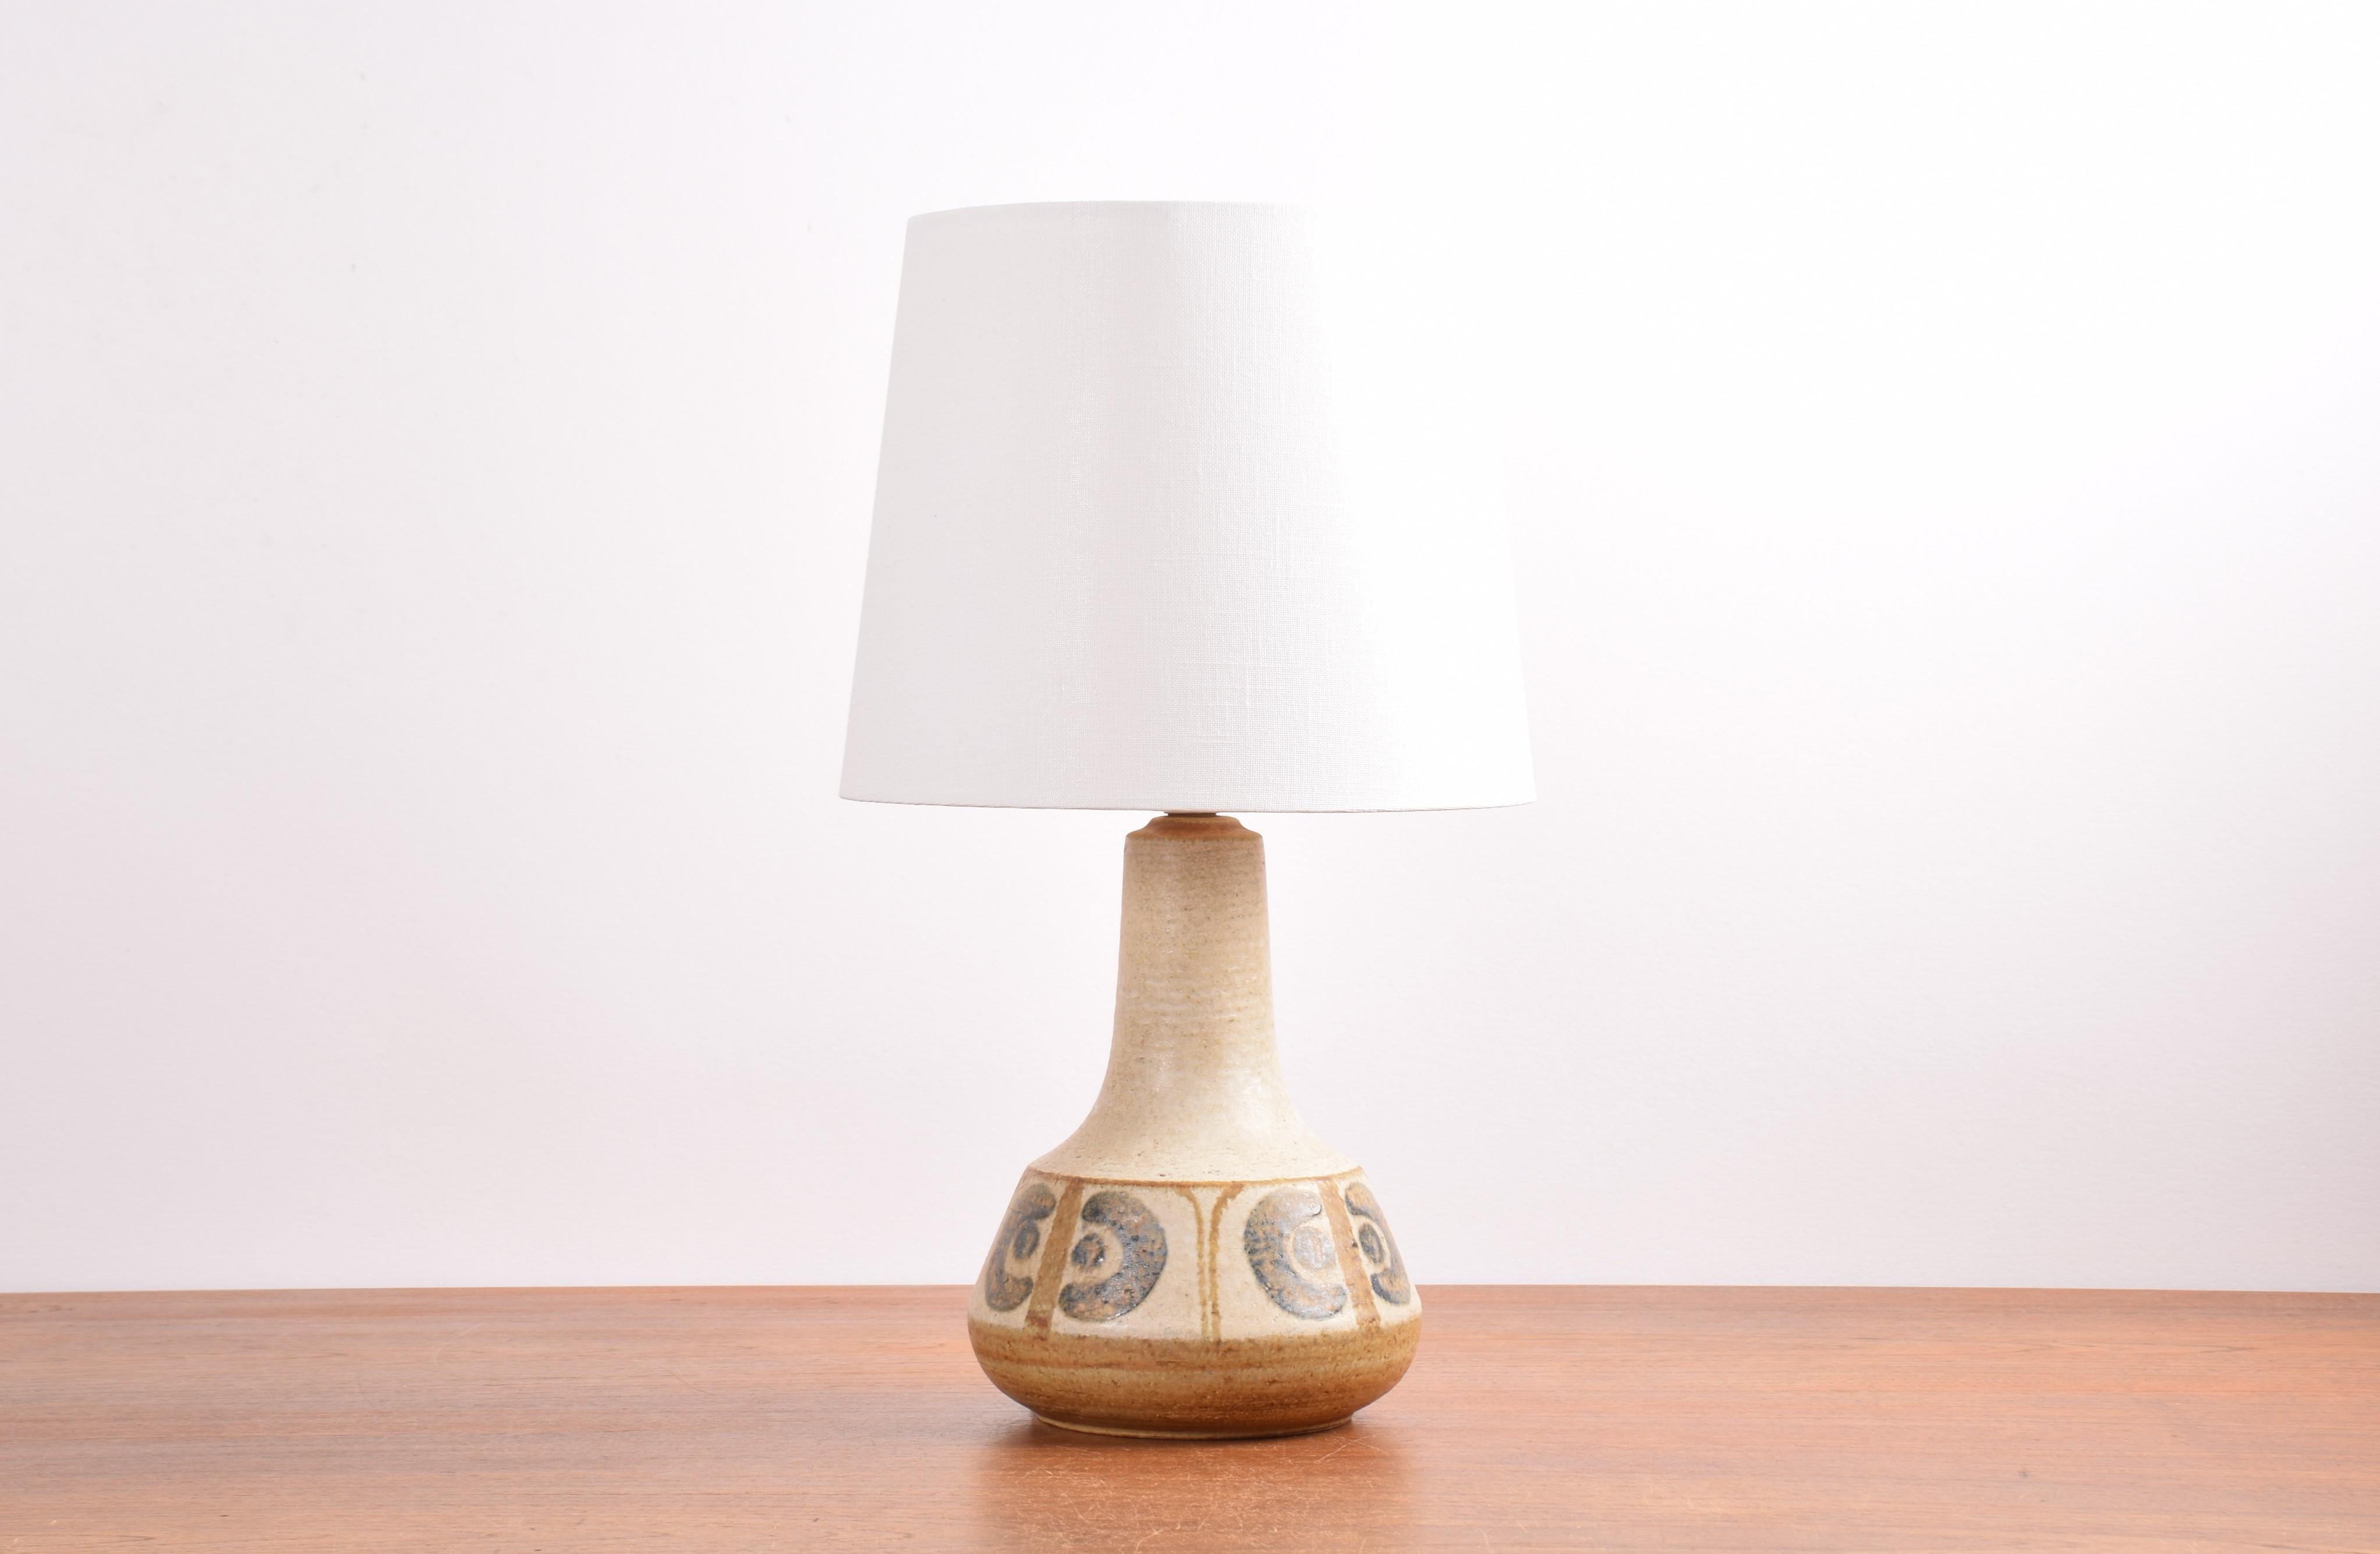 Midcentury Danish table lamp from Søholm Stentøj, Denmark designed by Svend Aage Jensen. Made circa 1960s to 70s.

The lamp is handmade and made from stoneware. It has a repeated handpainted stylised flower decor in eathy tones.

Included is a